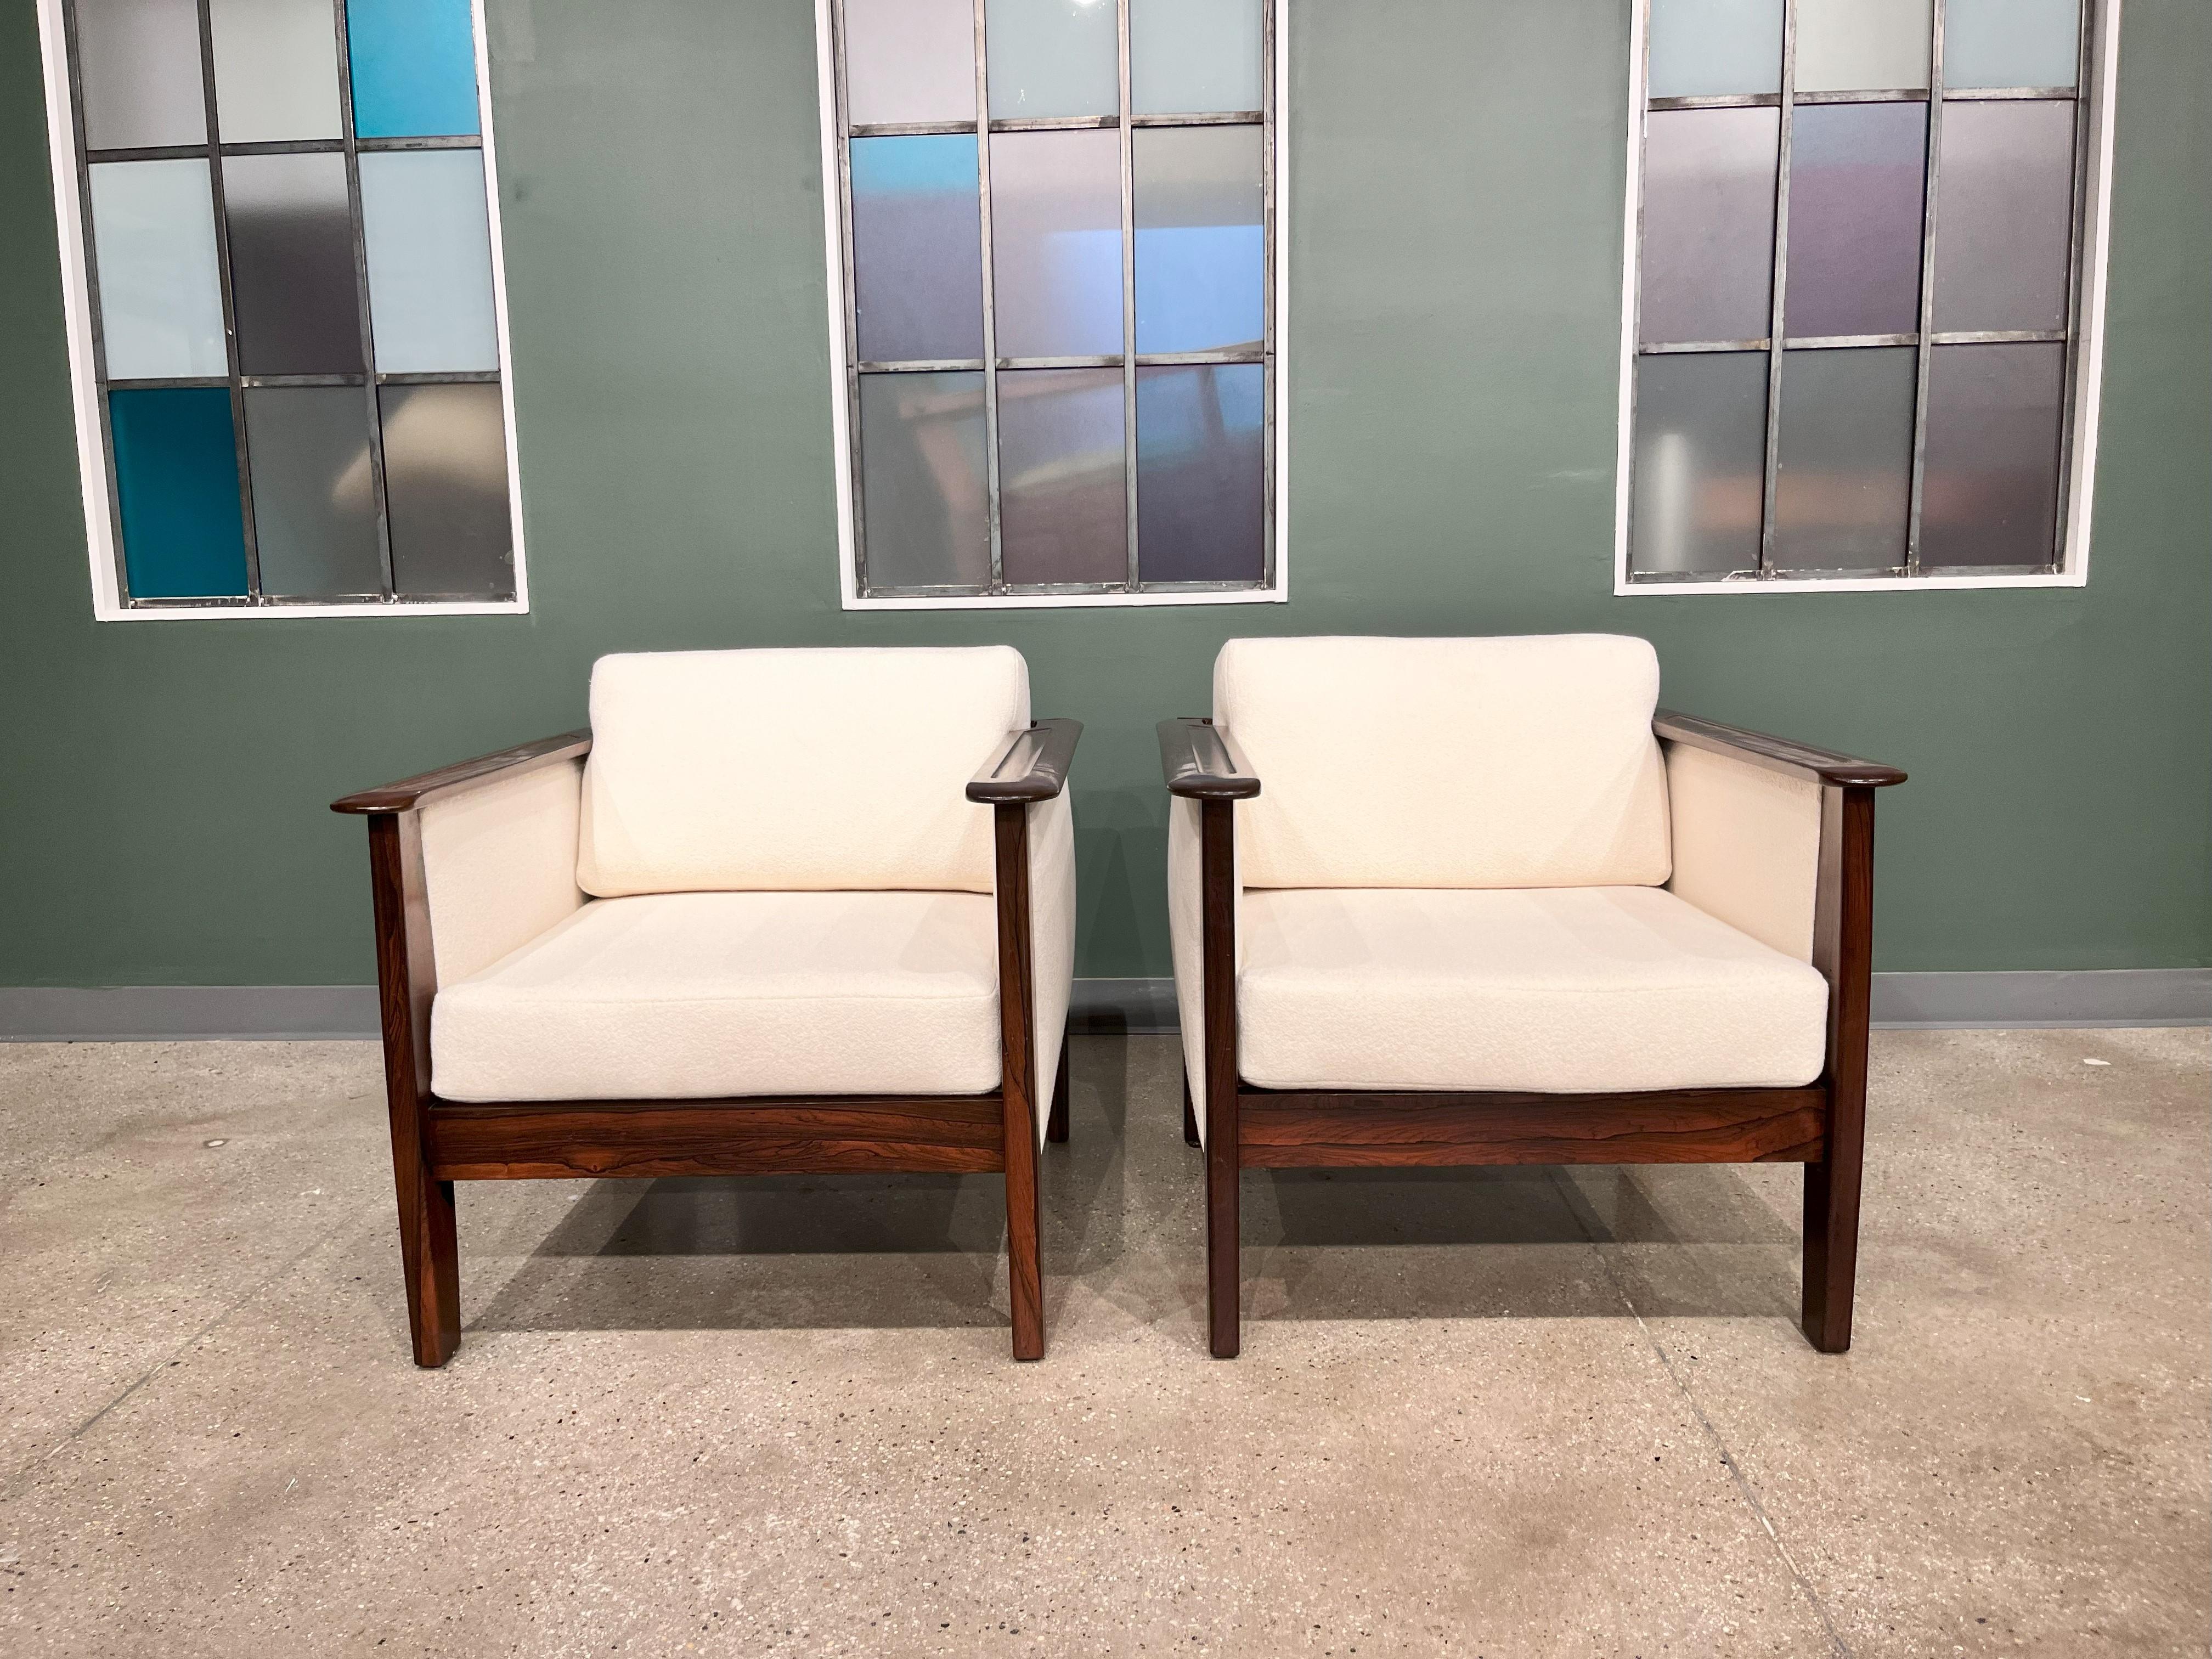 Available today in NYC, including free domestic shipping, this Mid-Century Modern Pair of Armchairs in Hardwood & Bouclé designed by Fatima is nothing less than a beauty!

Introducing a pair of cozy armchairs expertly crafted by Fatima during the